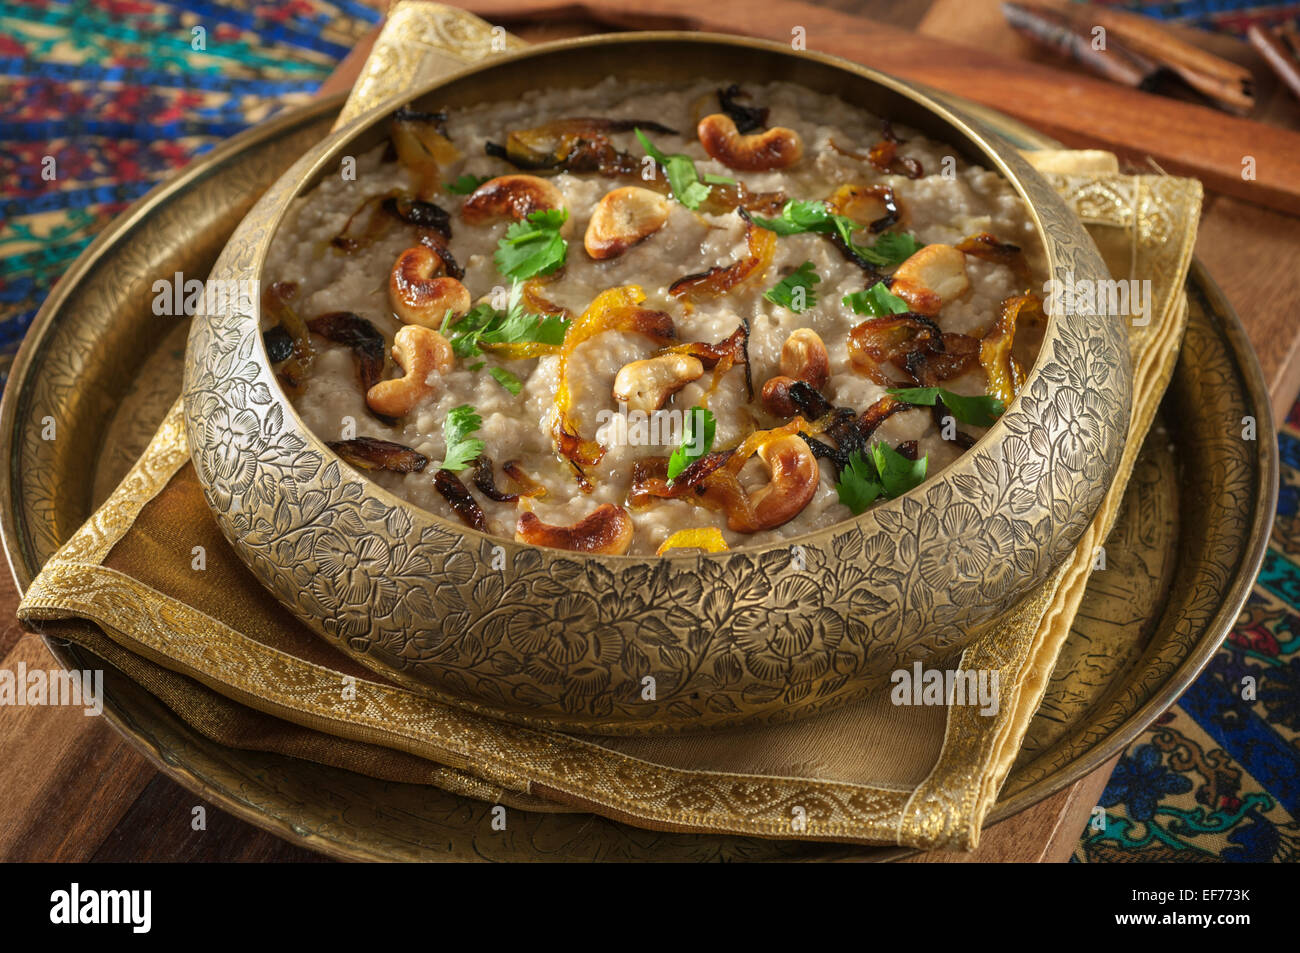 Harees. Spiced wheat and chicken dish. Middle East Stock Photo